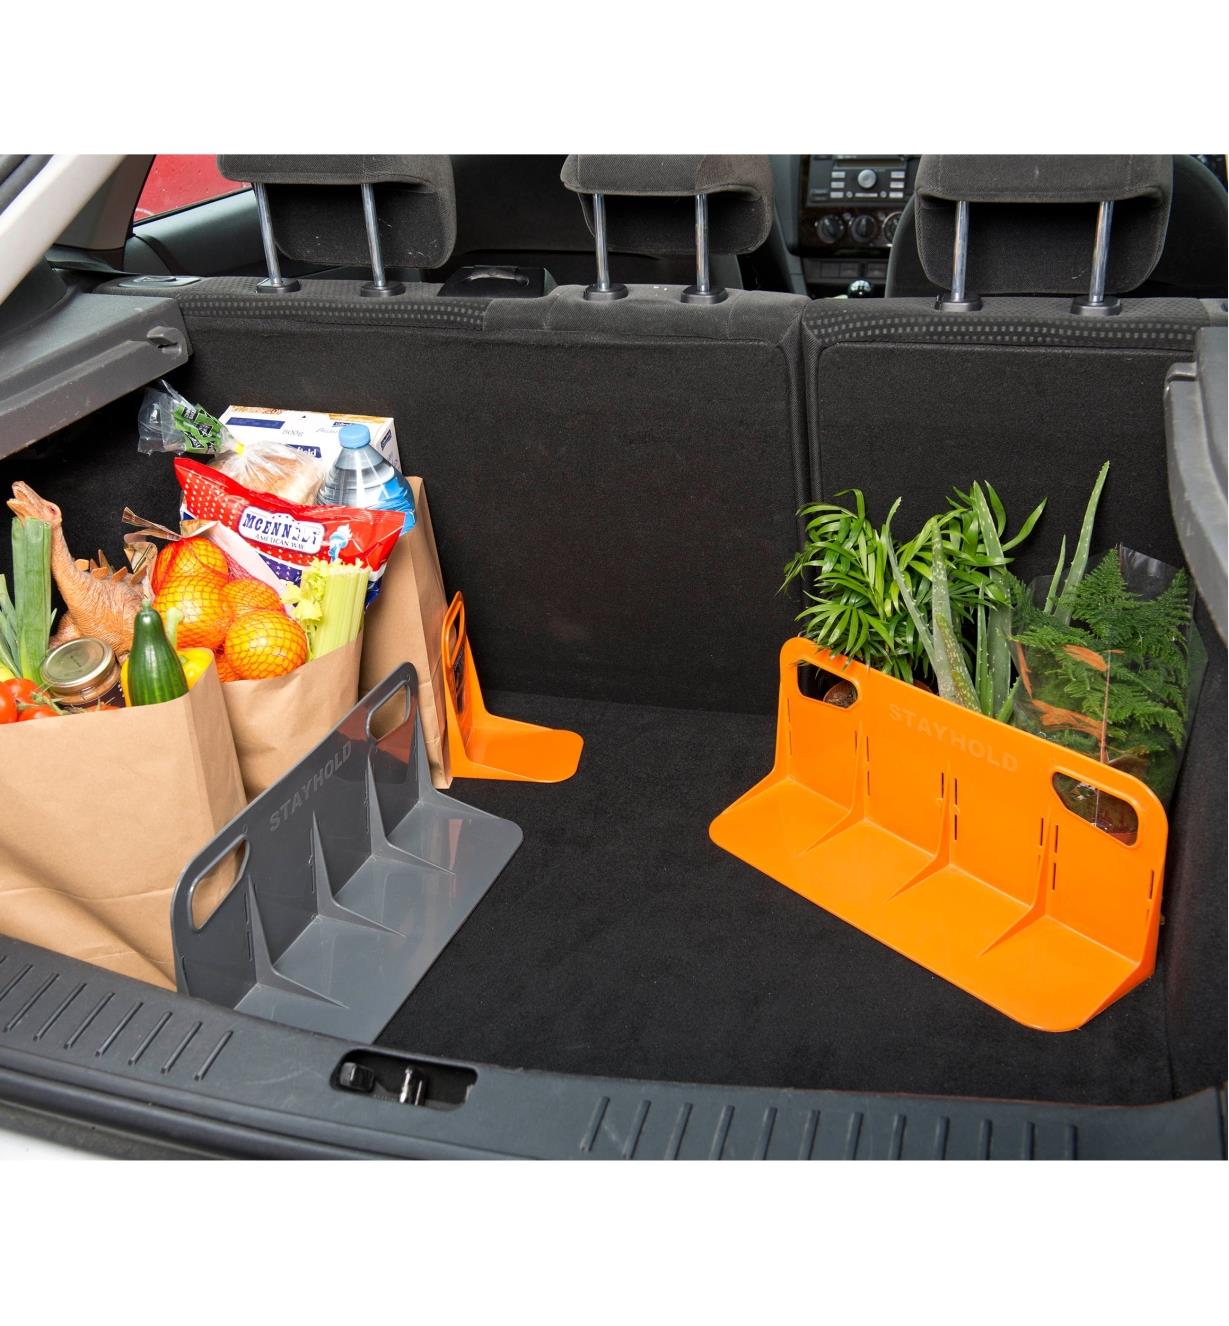 Three brackets supporting grocery bags and plants in a vehicle's cargo area